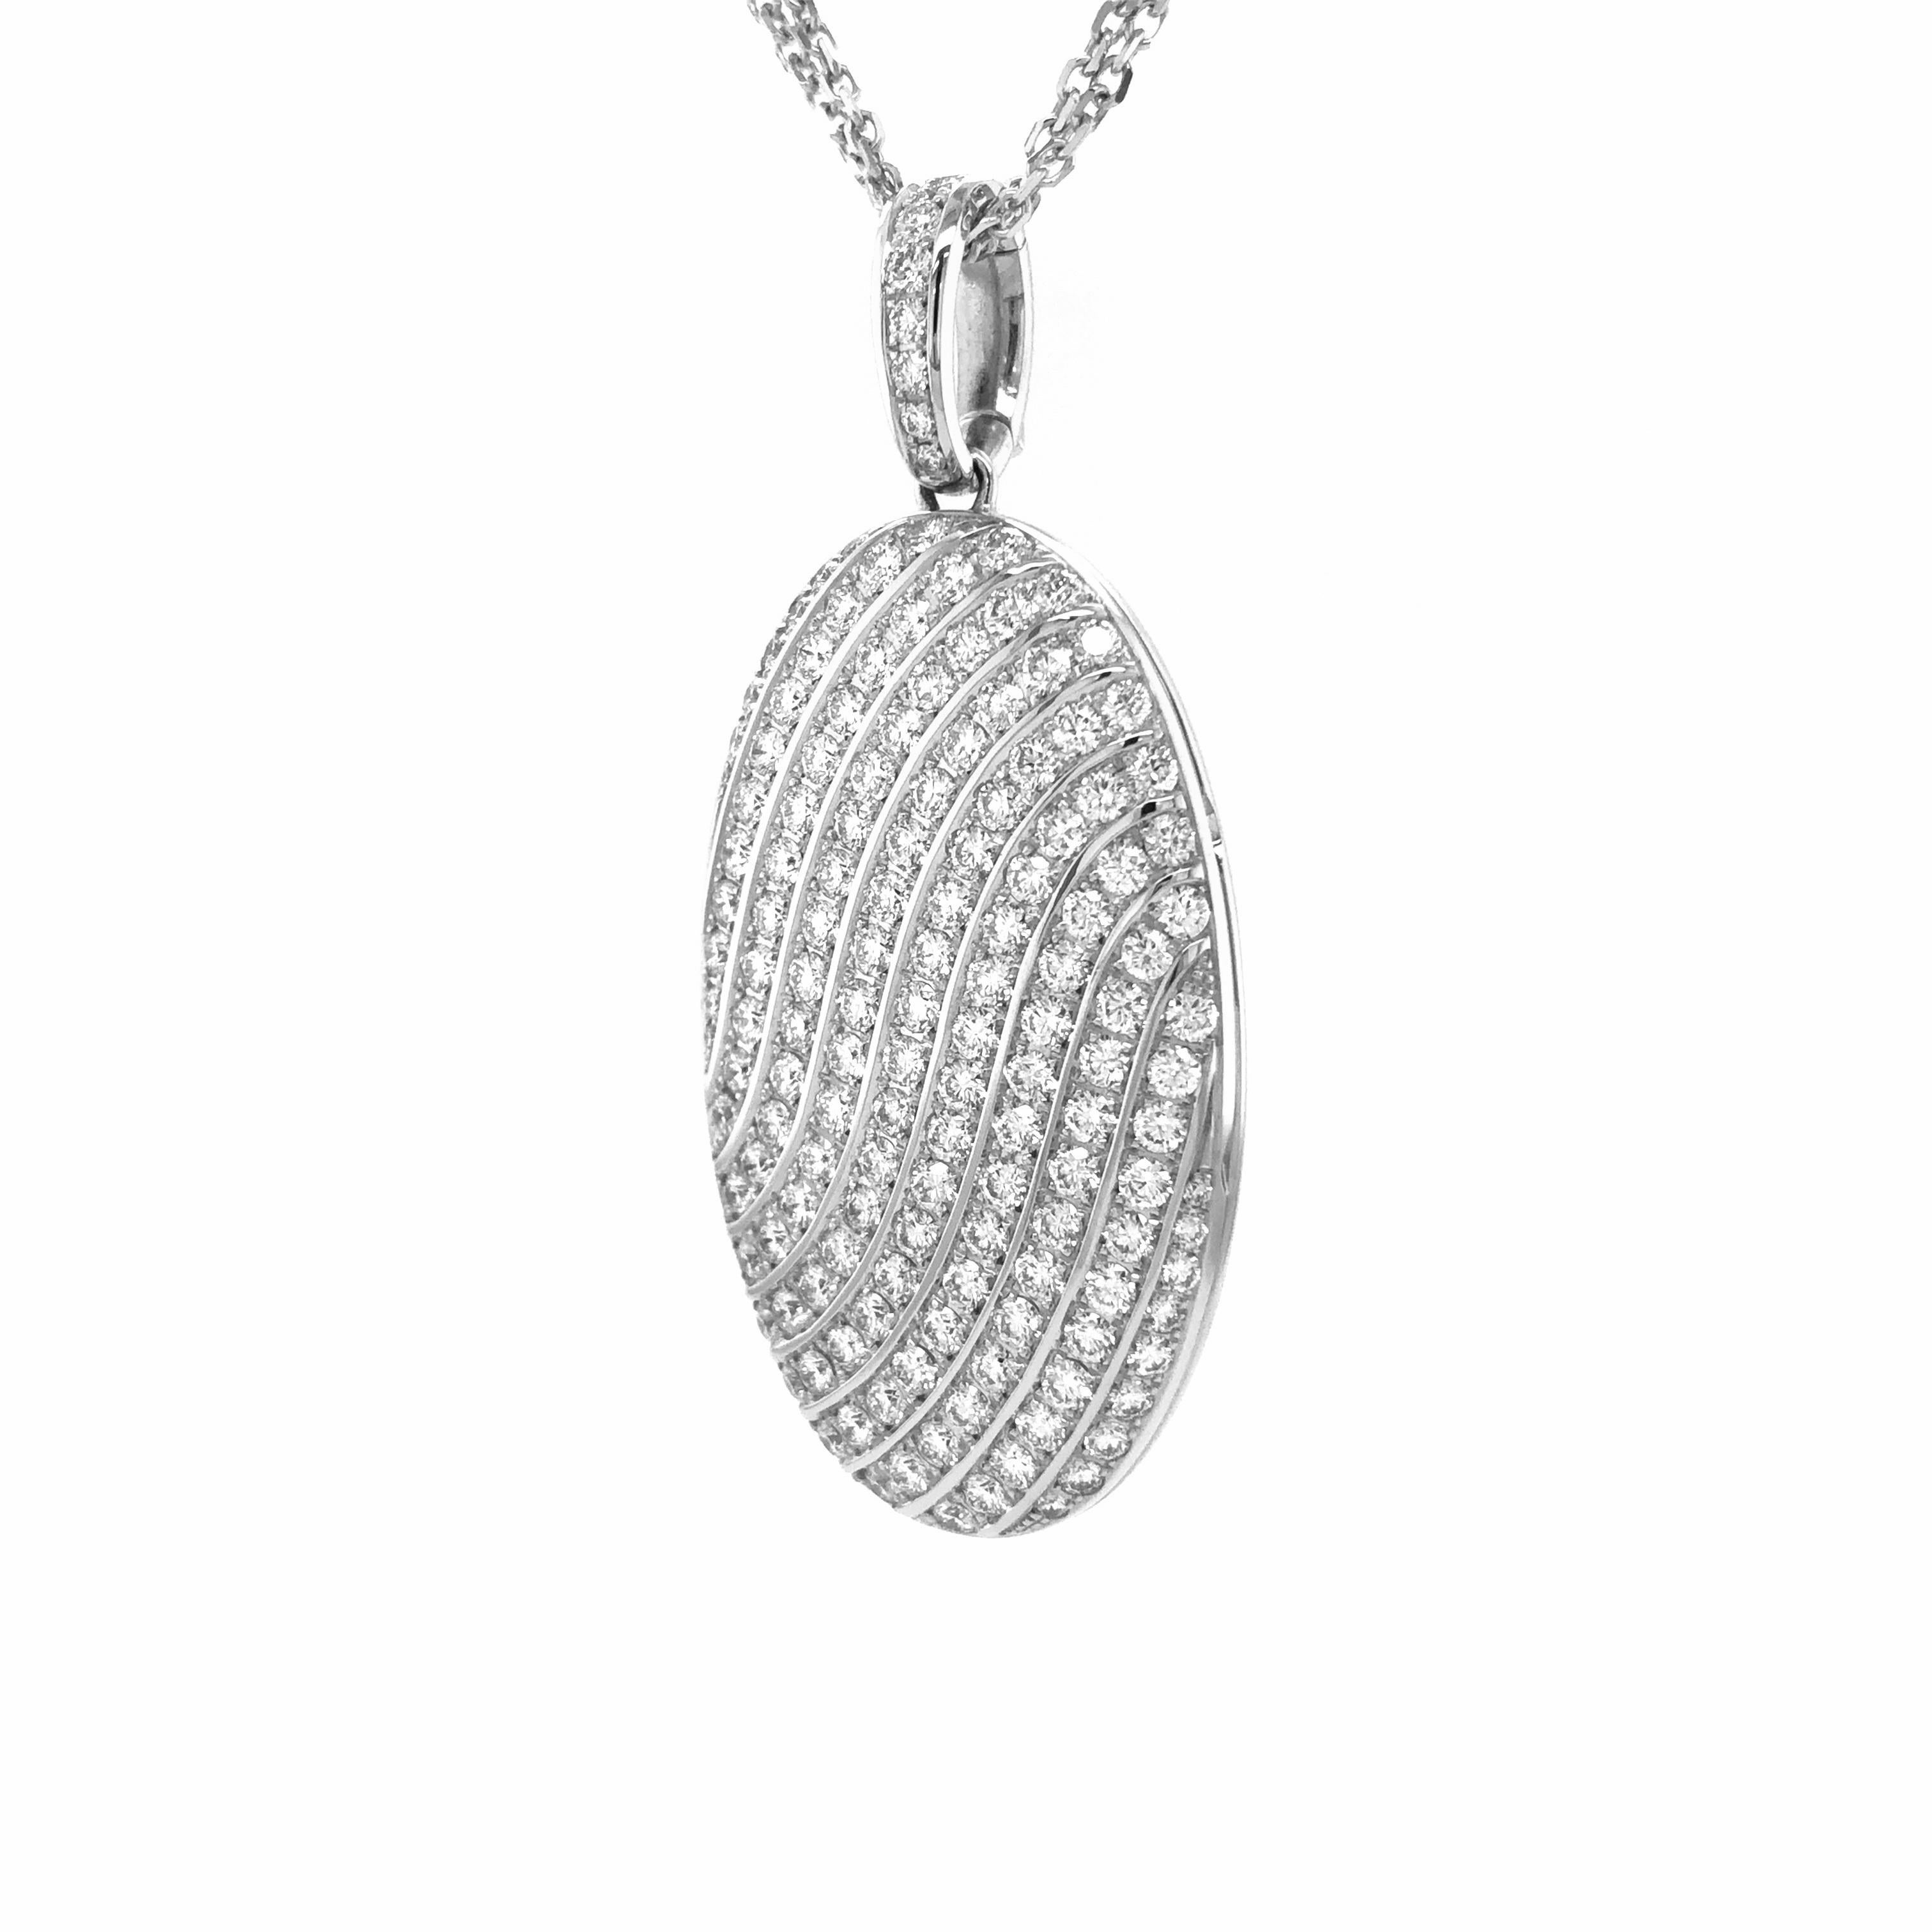 Victor Mayer customizable oval pendant locket 18k white gold, Calima Collection, 151 diamonds, total 4.18 ct, G VS, brilliant cut, measurements app. 40 mm x 24 mm

About the creator Victor Mayer
Victor Mayer is internationally renowned for elegant